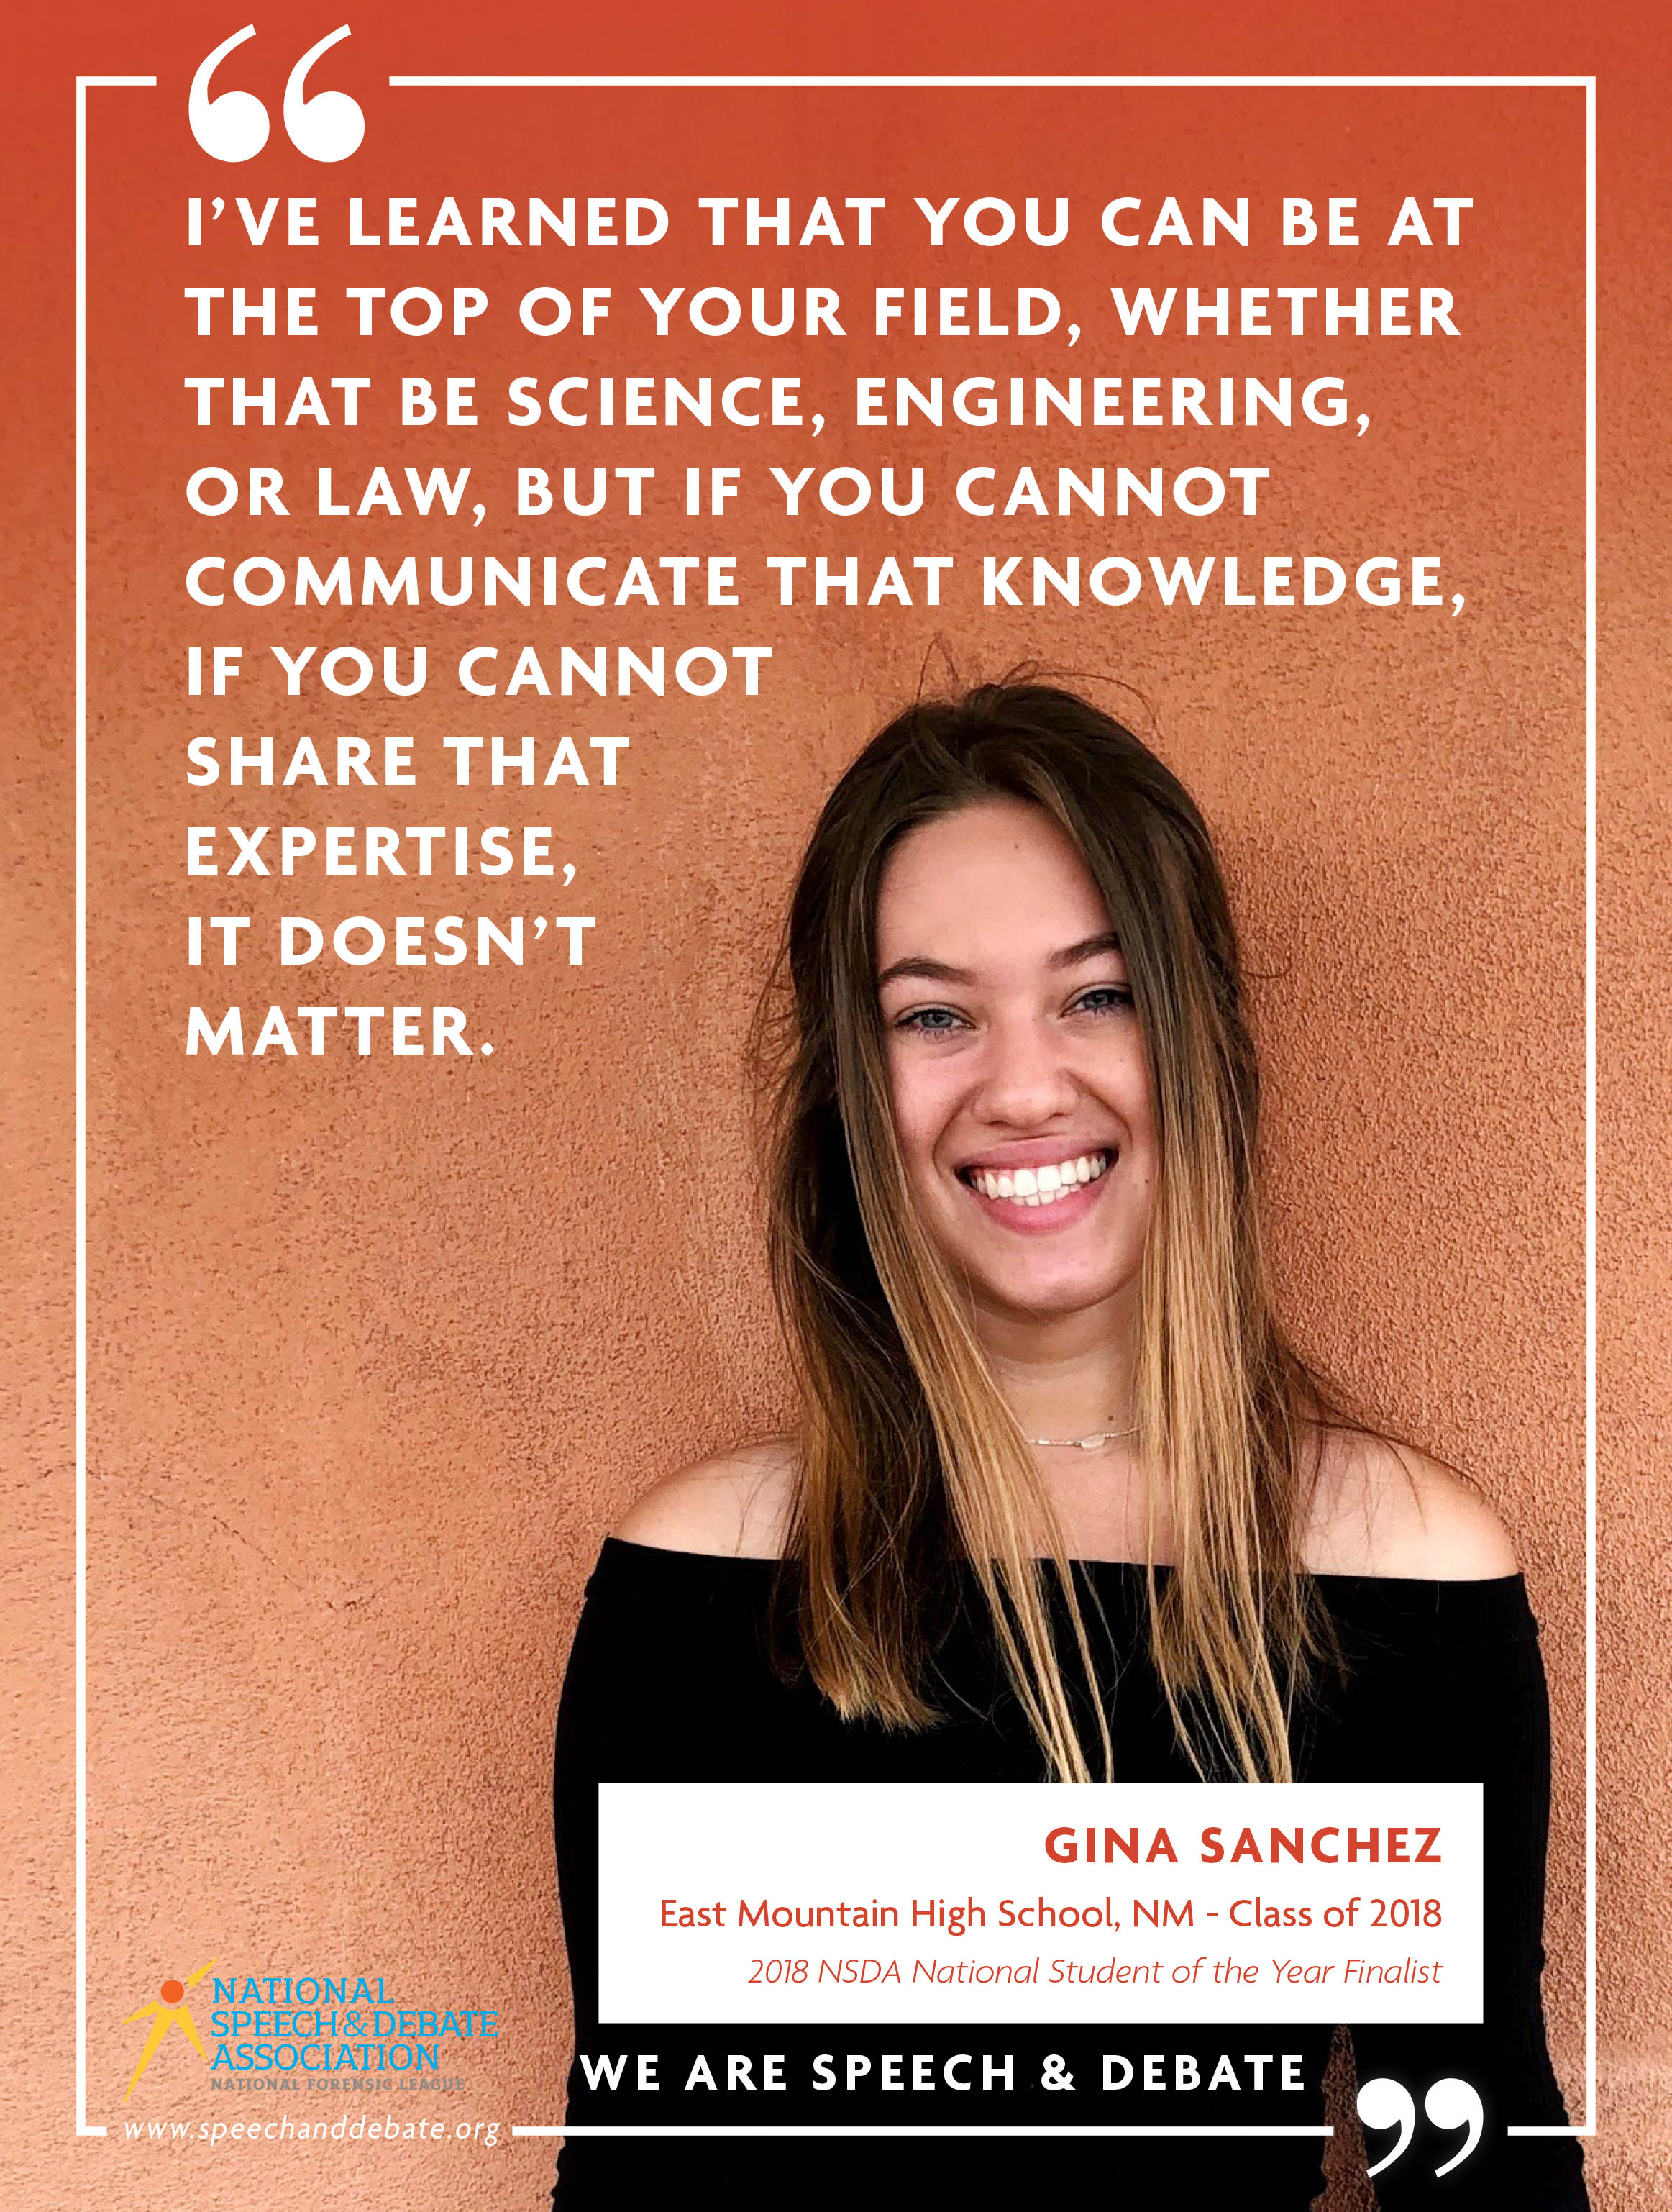 "I’VE LEARNED THAT YOU CAN BE AT THE TOP OF YOUR FIELD, WHETHER THAT BE SCIENCE, ENGINEERING, OR LAW, BUT IF YOU CANNOT COMMUNICATE THAT KNOWLEDGE, IF YOU CANNOT SHARE THAT EXPERTISE, IT DOESN’T MATTER." - Gina Sanchez